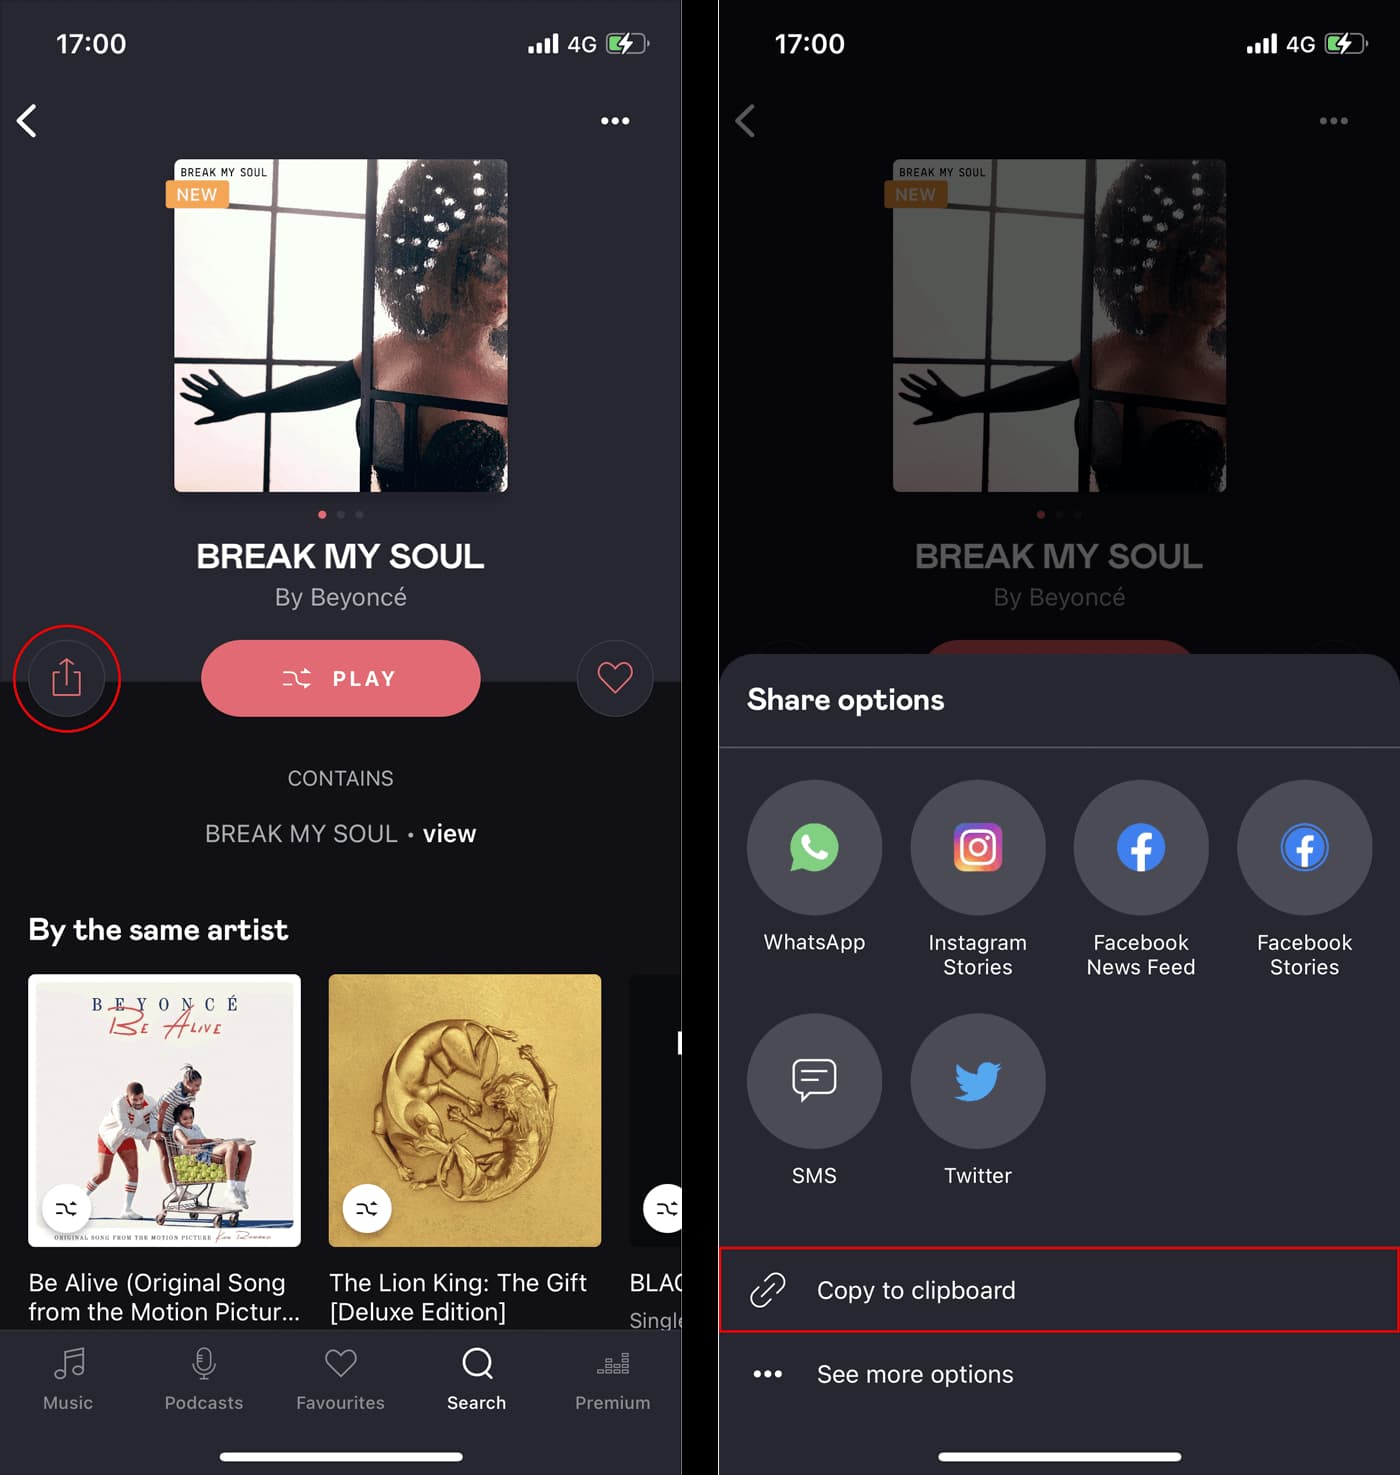 How to download songs from Deezer mobile app?